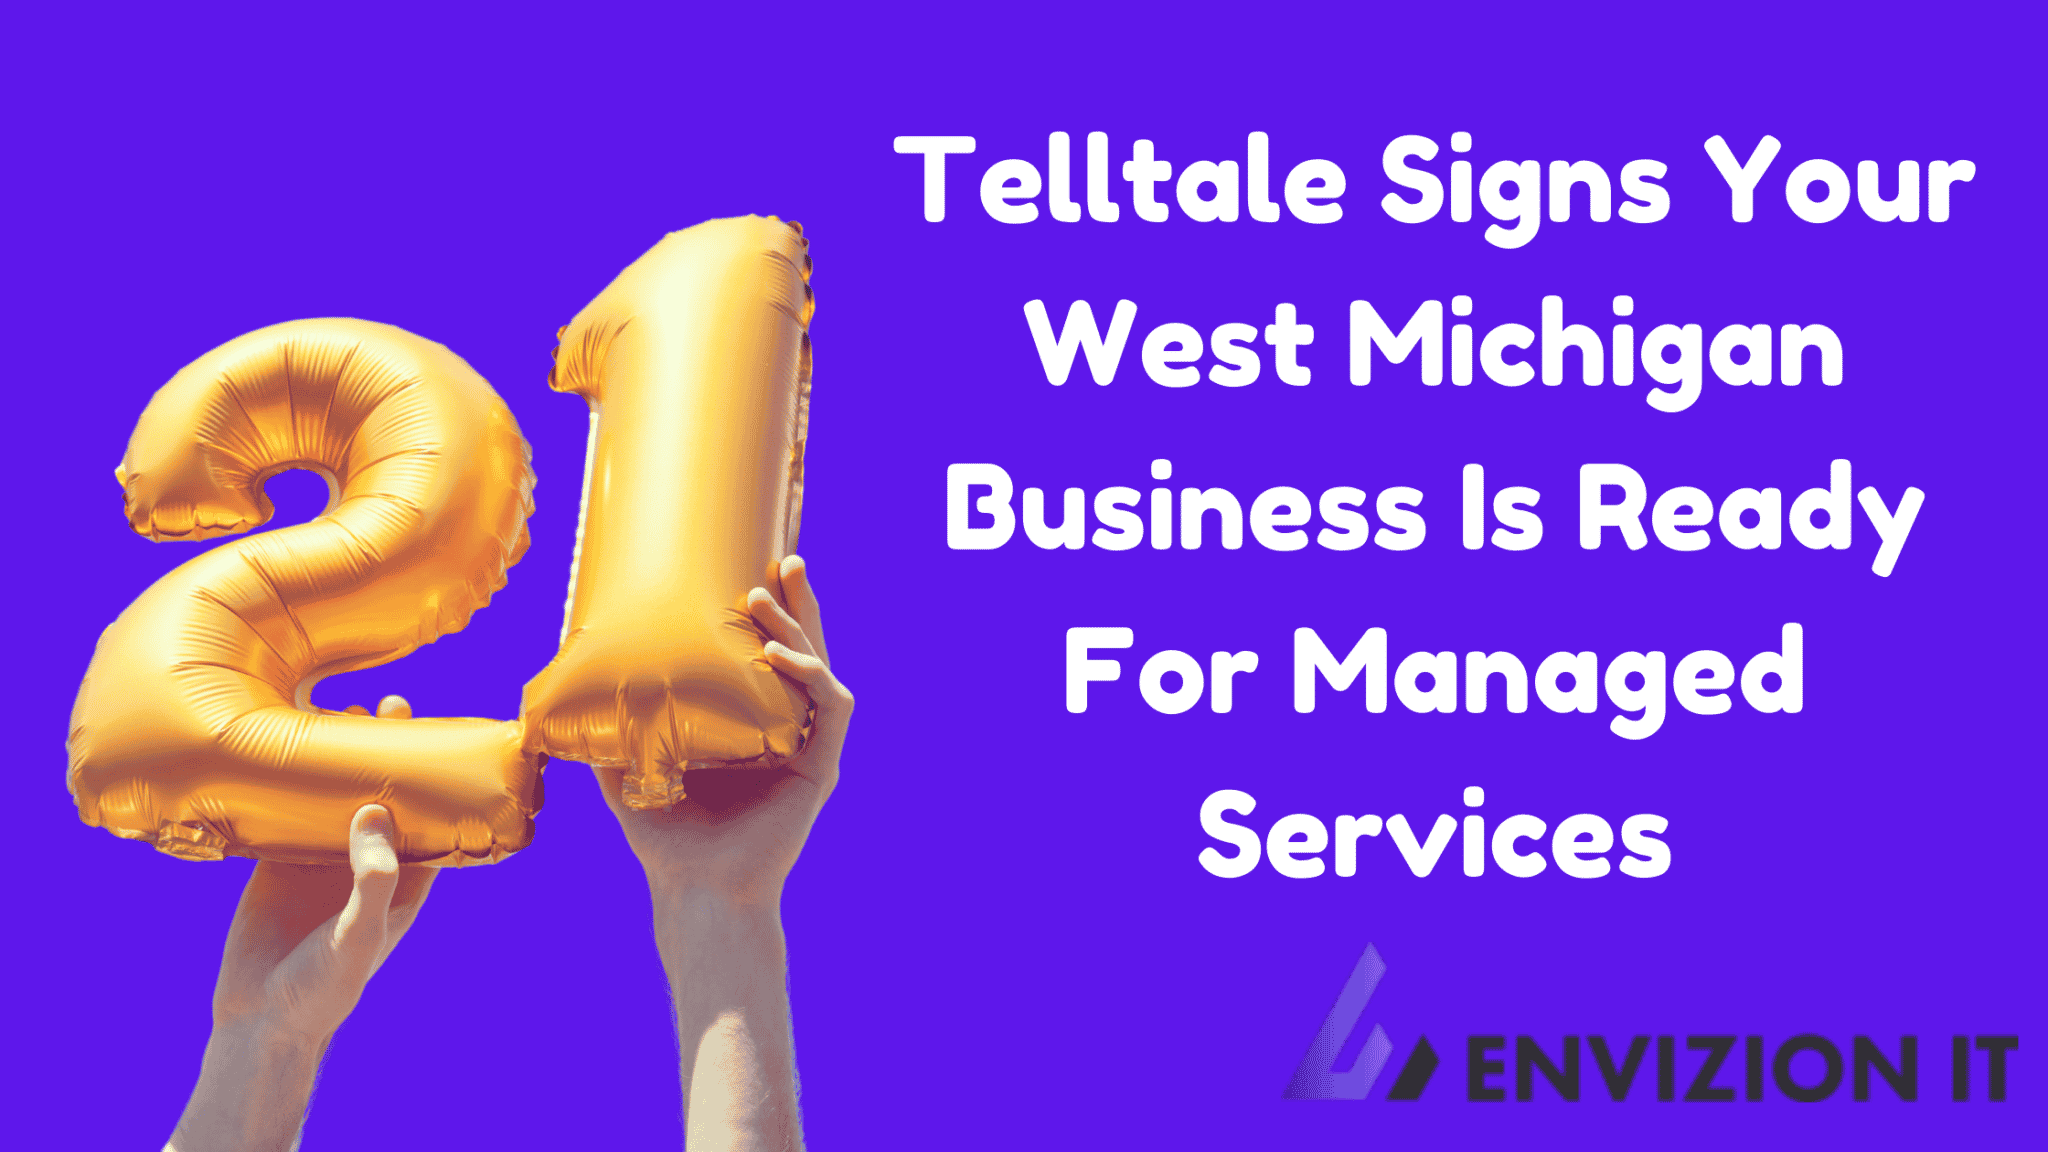 21 Telltale Signs Your West Michigan Business Is Ready For Managed Services